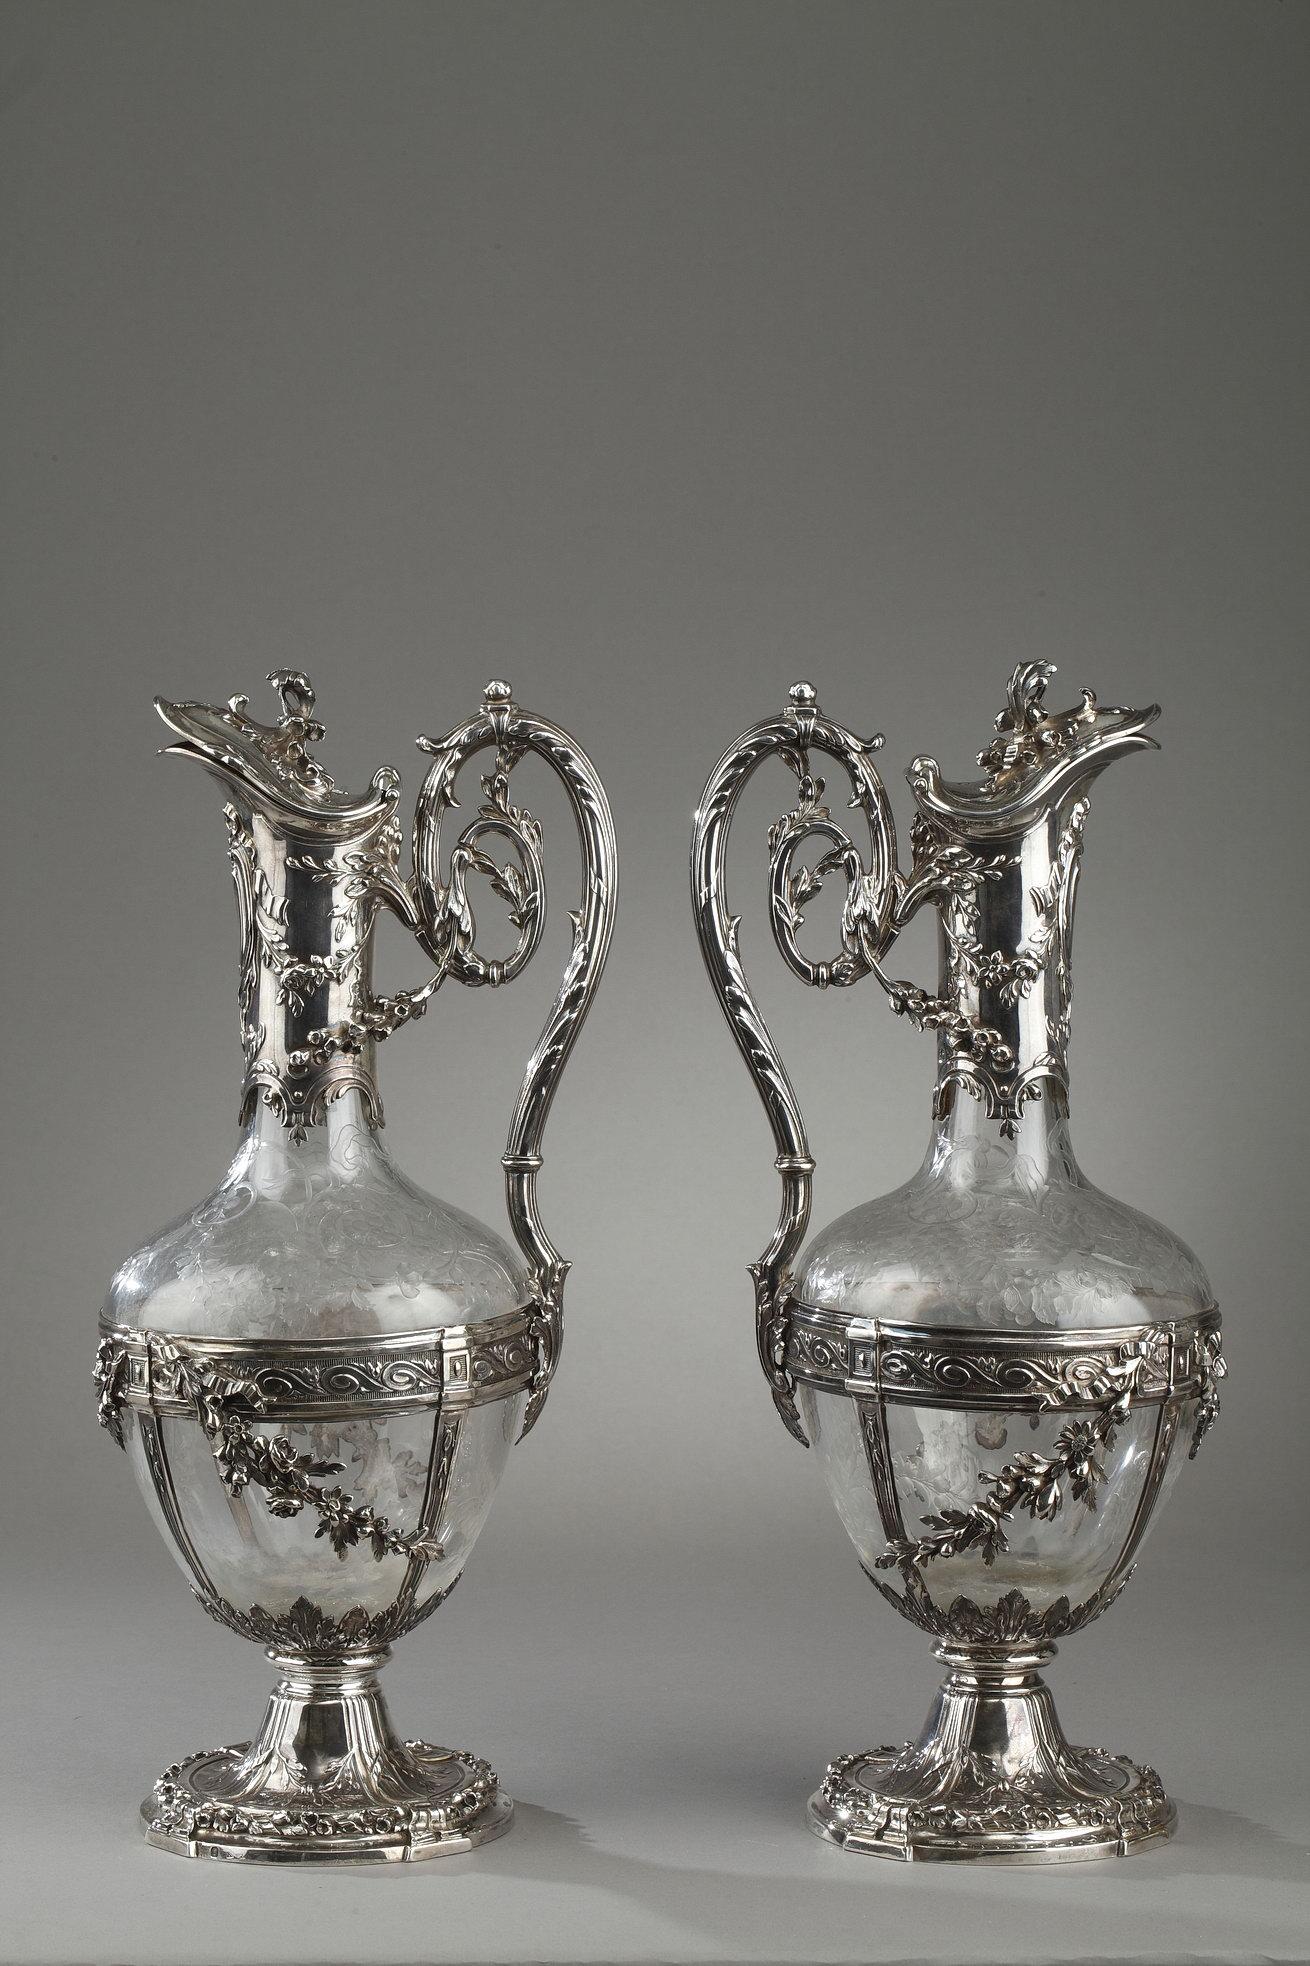 Pair of cut crystal decanter or ewer engraved with scrolls and floral patterns. The crystal is set in a fine silver setting with pilasters and garlands on the body of each carafe. The top and the handle are decorated with floral patterns and a